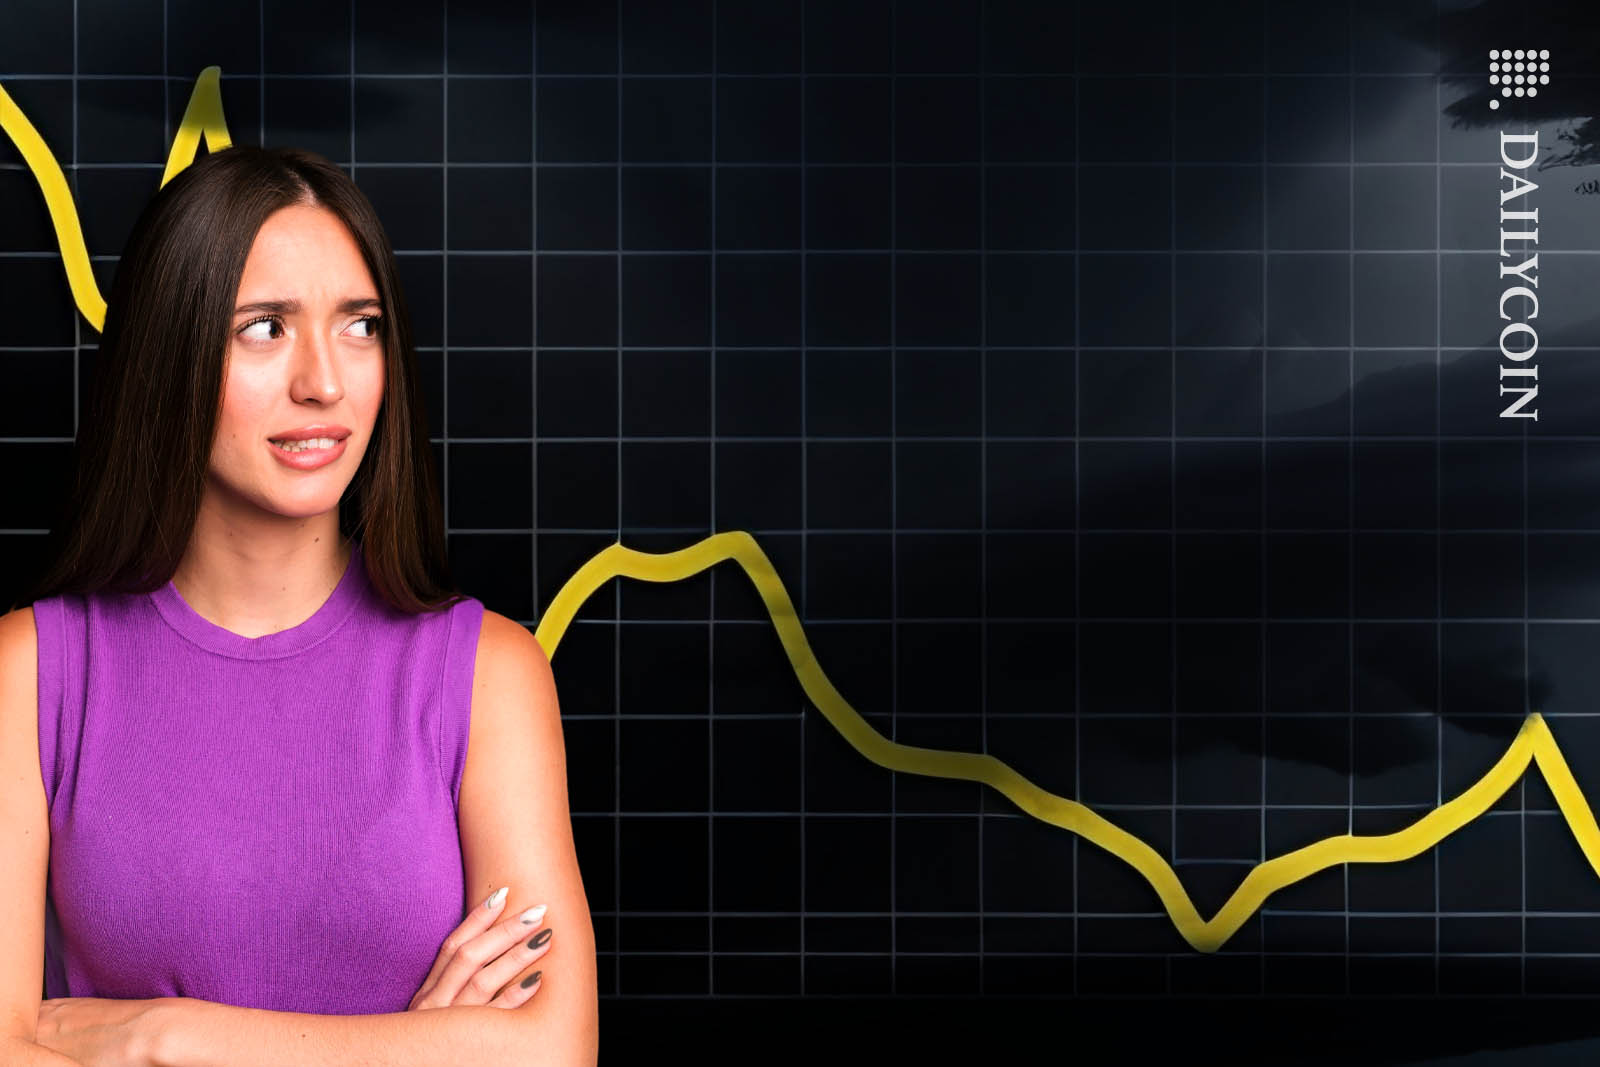 Very disappointed woman looking at a downtrend chart.